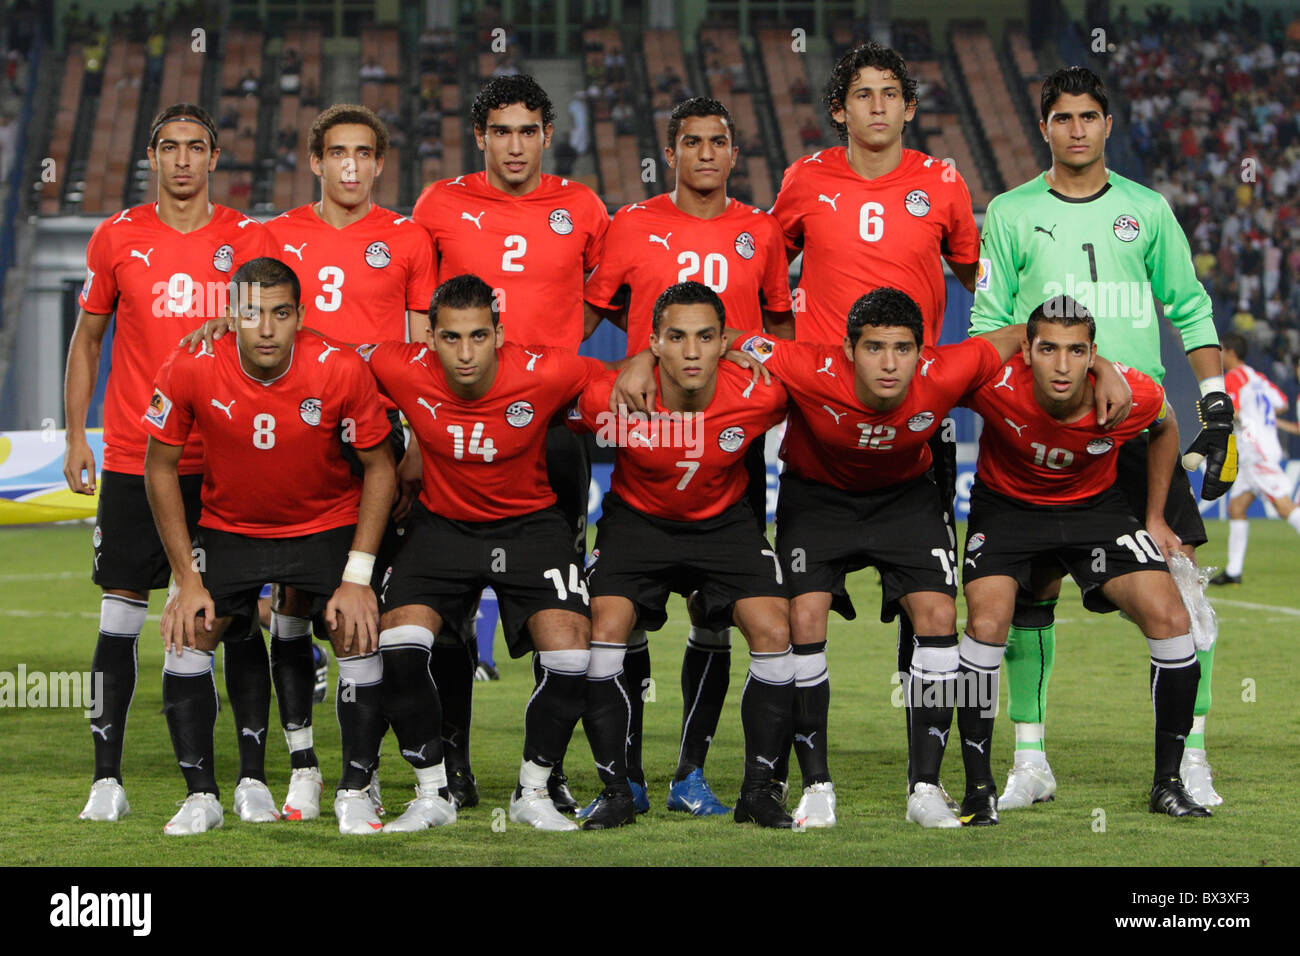 The Egyptian U-20 National Team lines up prior to a FIFA U-20 World Cup round 16 match against Costa Rica Oct 6, 2009 (see desc) Stock Photo